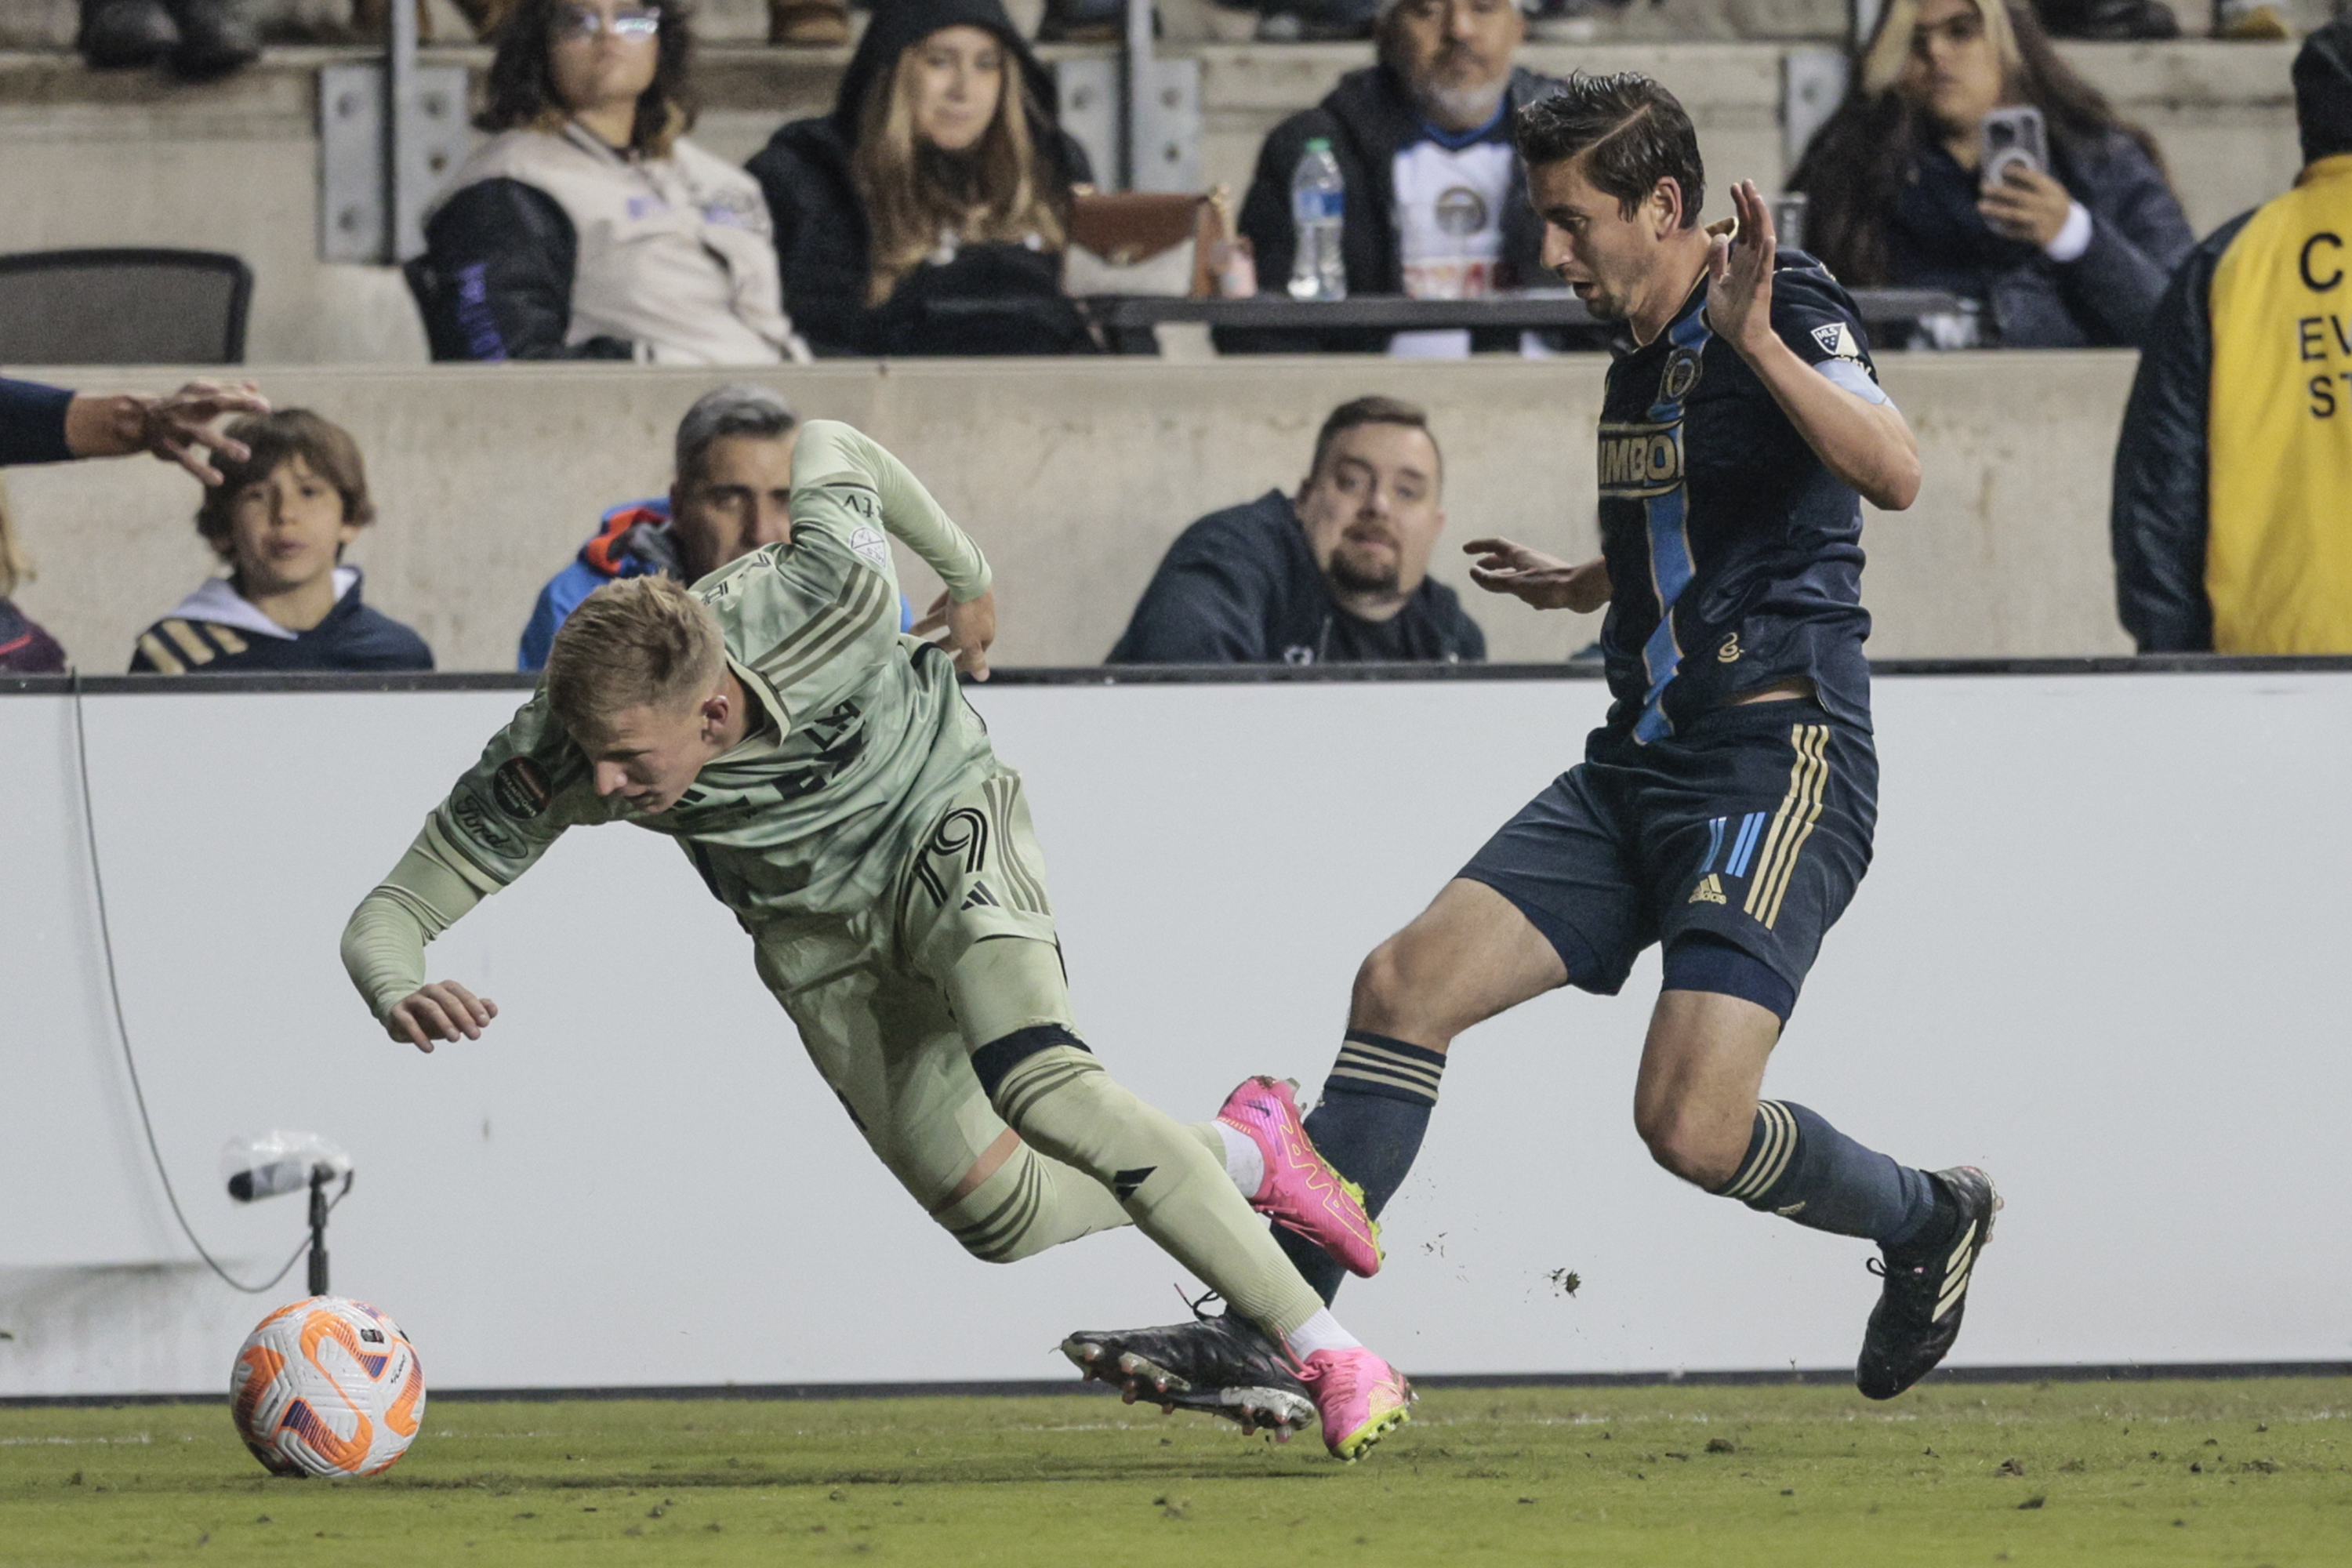 Philadelphia Union will look to continue their form into this